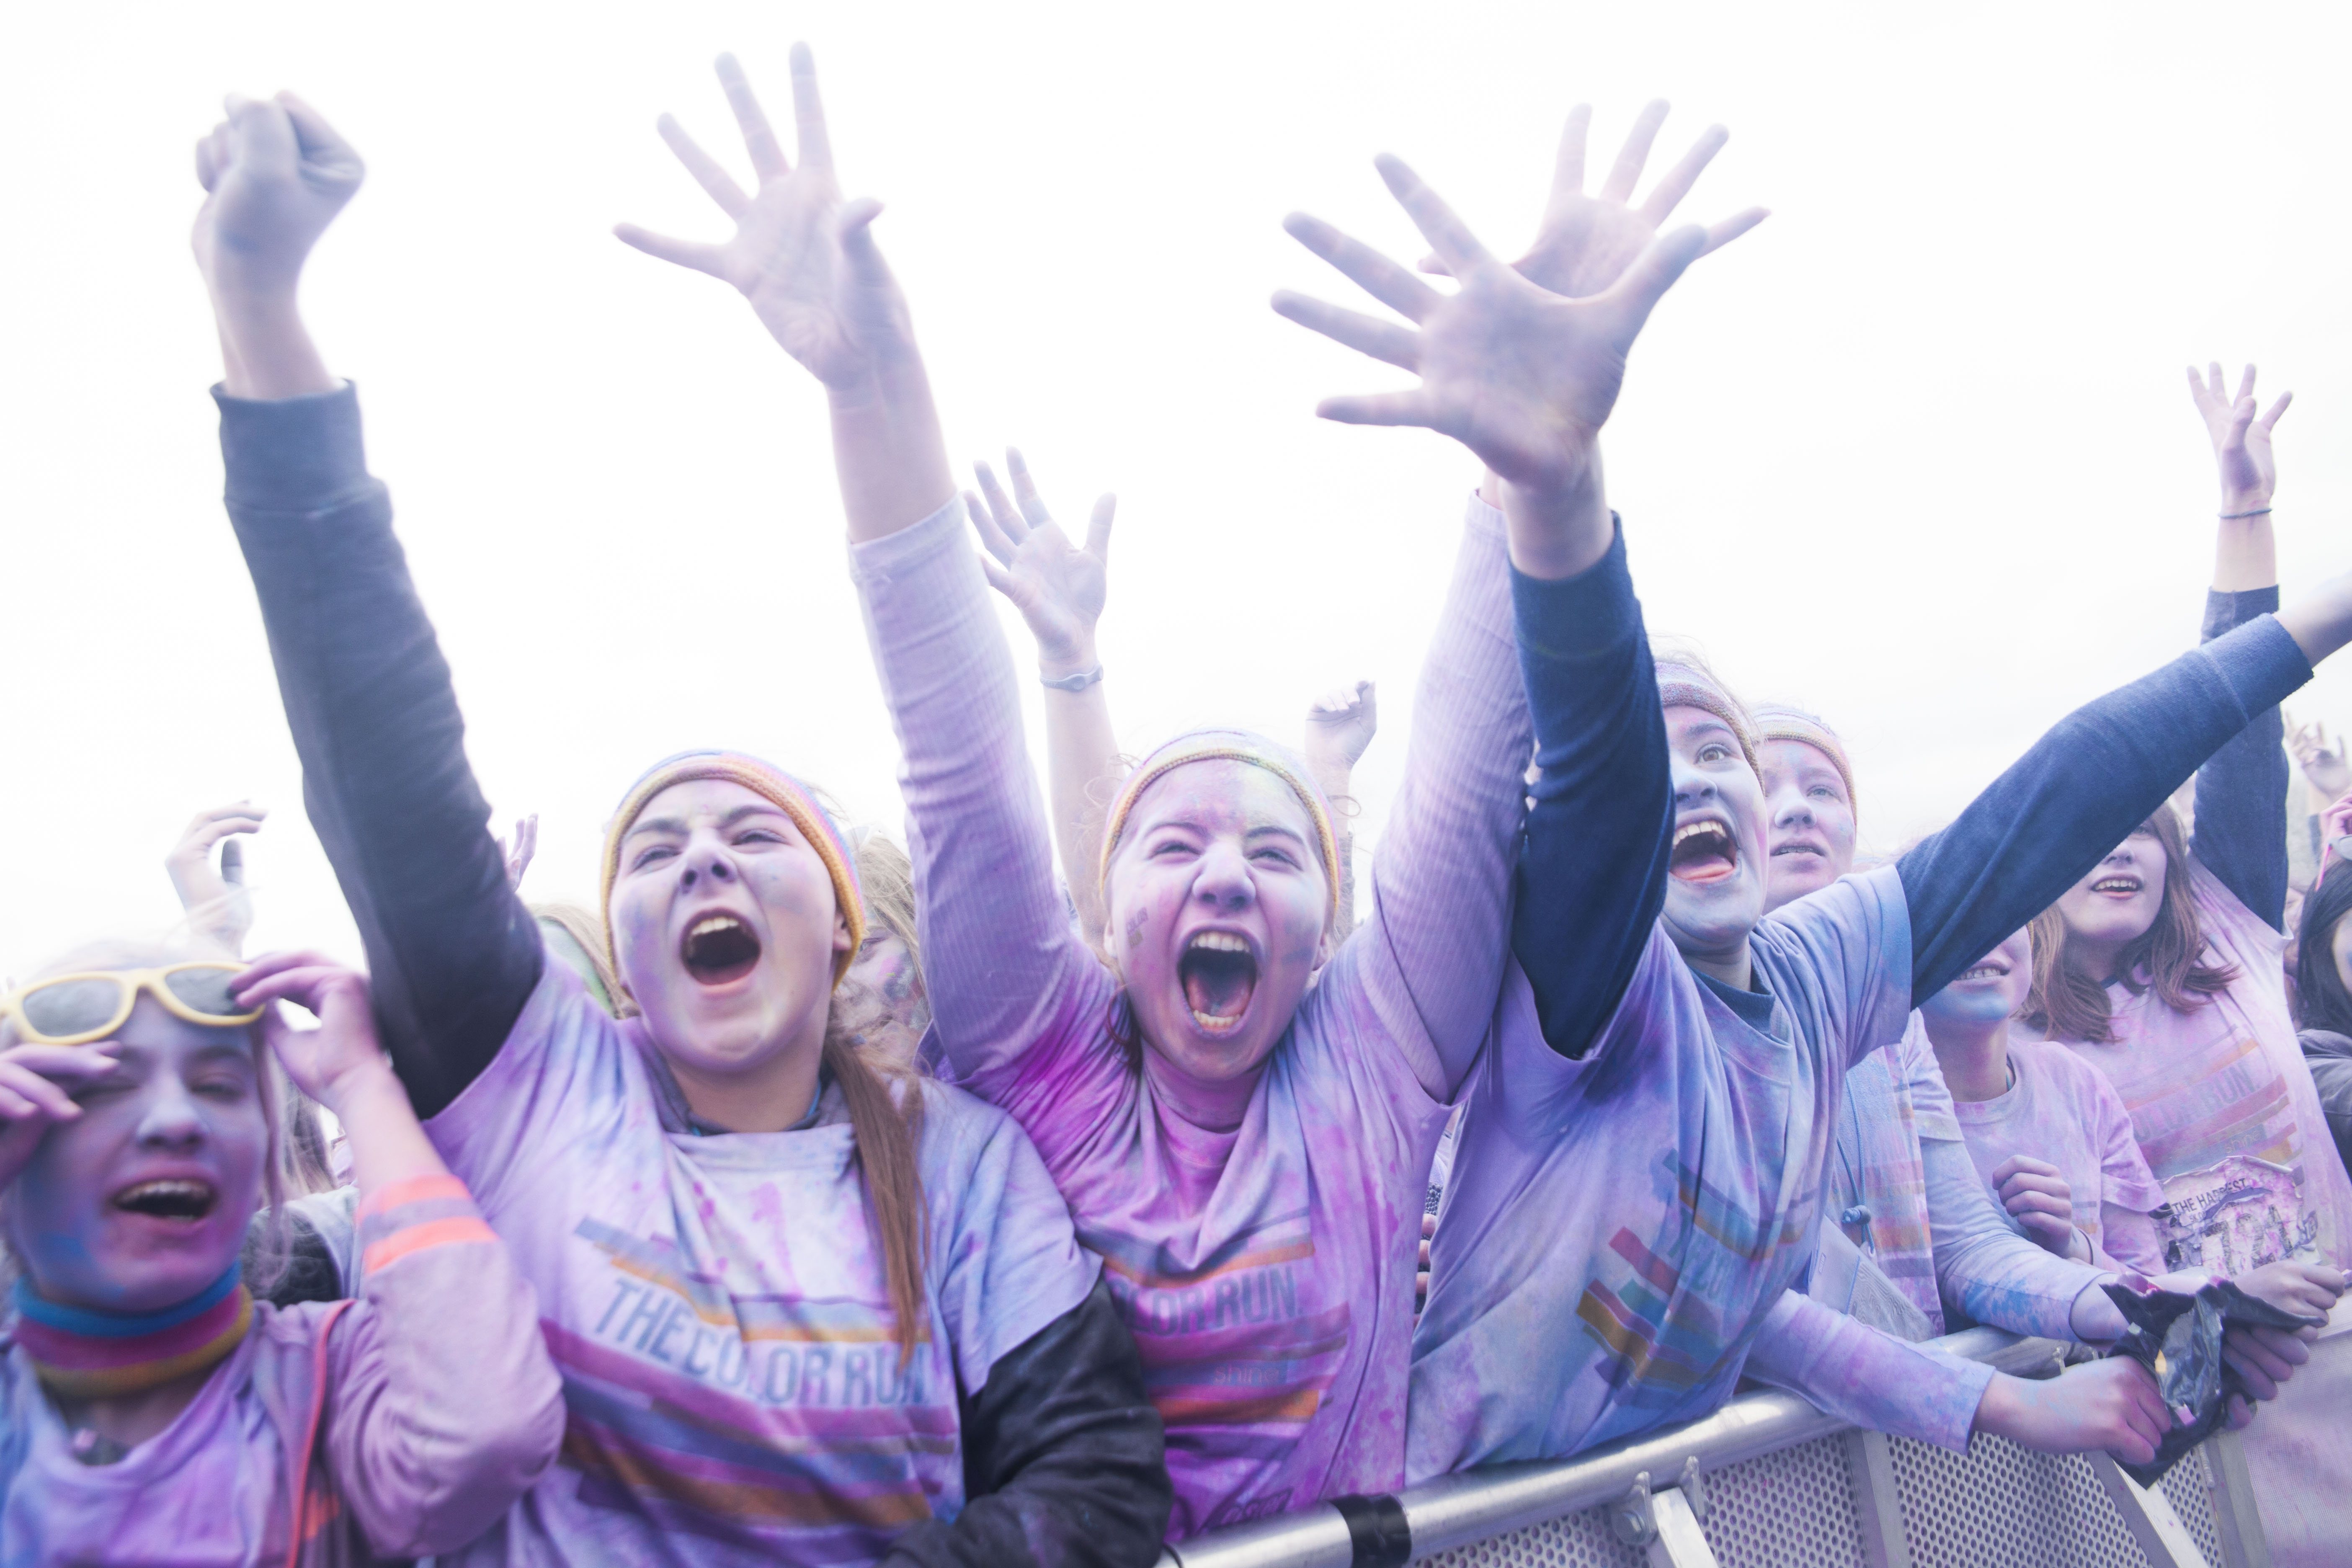 TheColorRun2015_HelenaLundquist_mindre_12